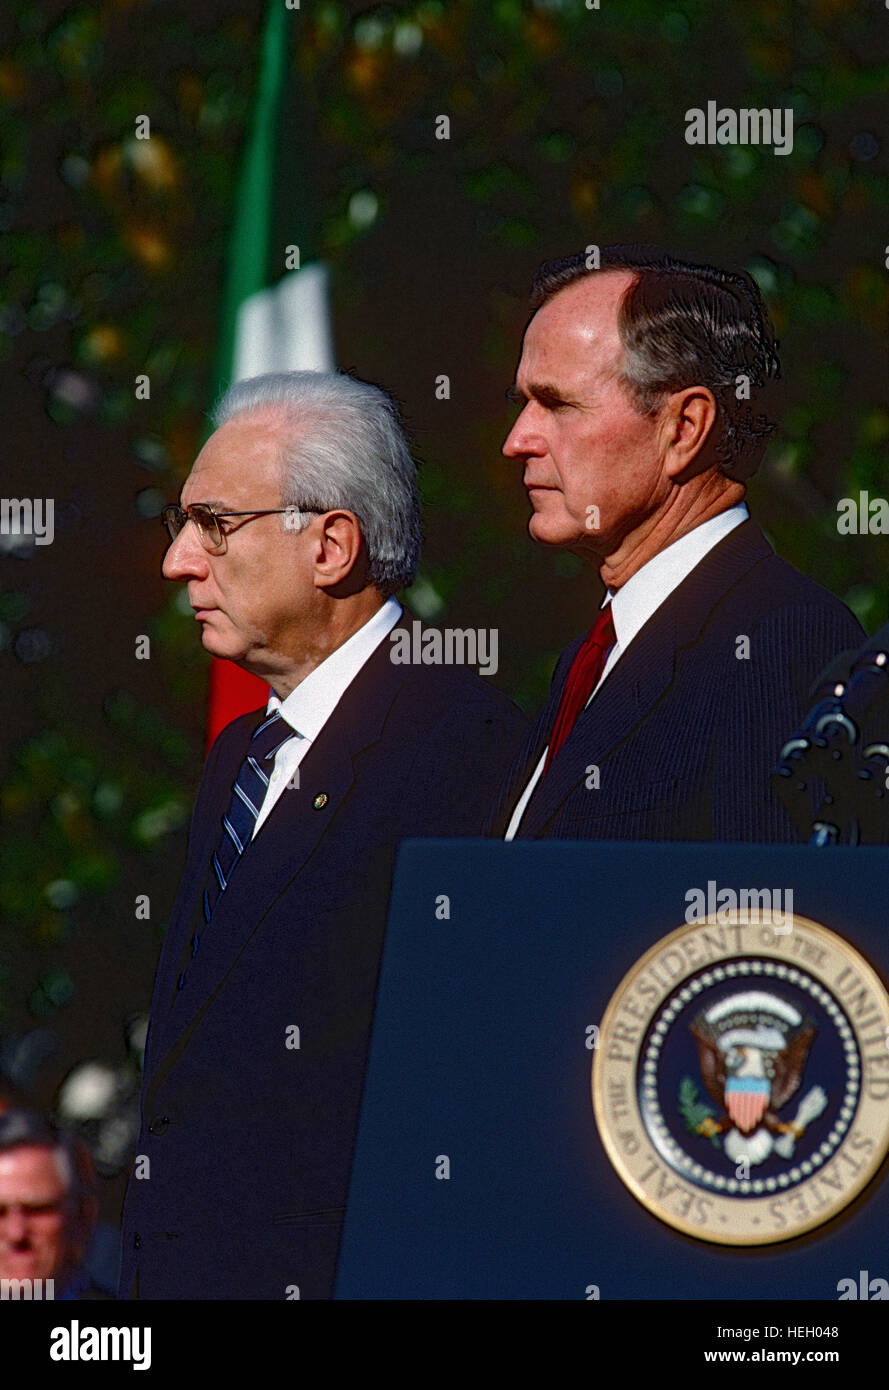 Washington, DC., USA, 11th October, 1989 President George H.W. Bush and President of Italy Francesco Cossiga deliver remarks during official welcoming ceremony at the start of the state visit on the South Lawn of the White House  Credit: Mark Reinstein Stock Photo